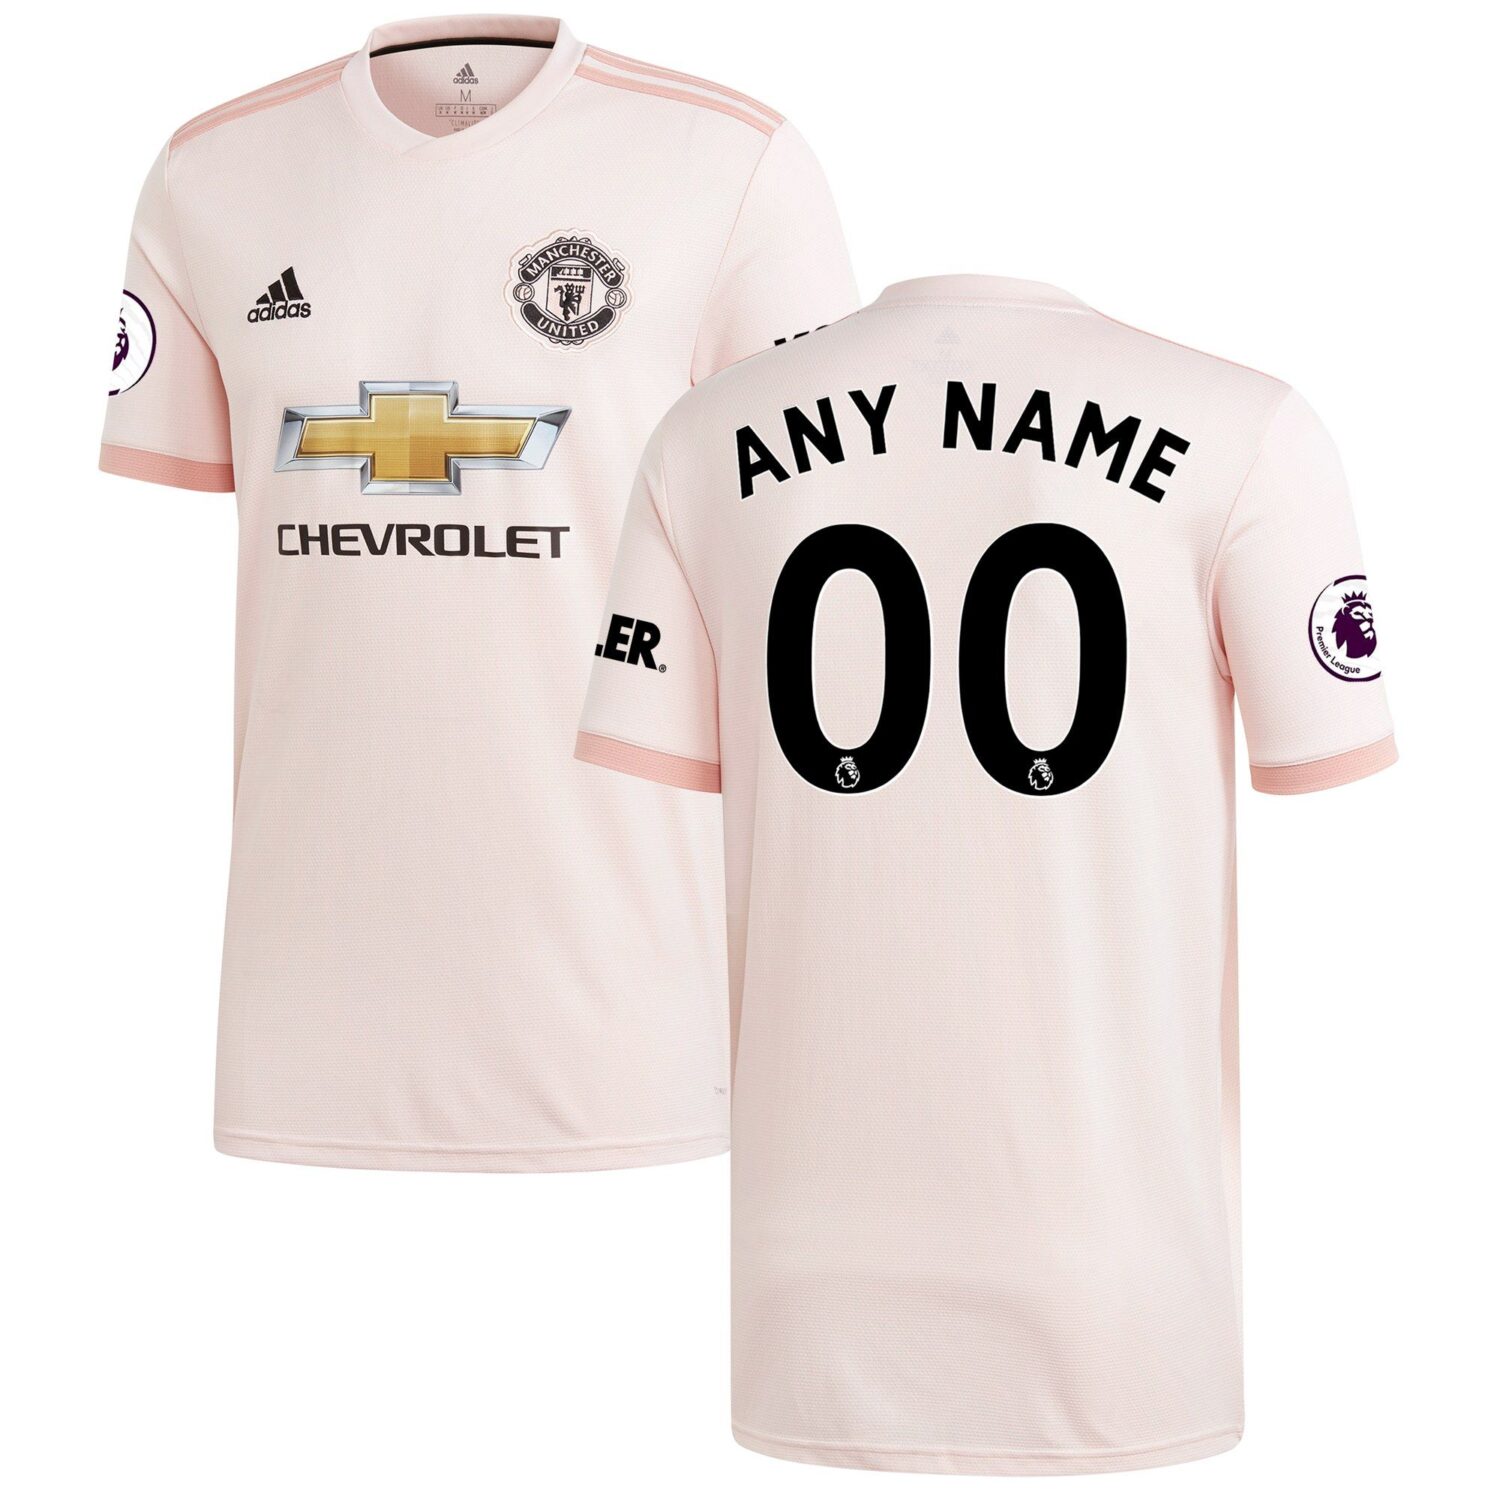 manchester united jersey with name